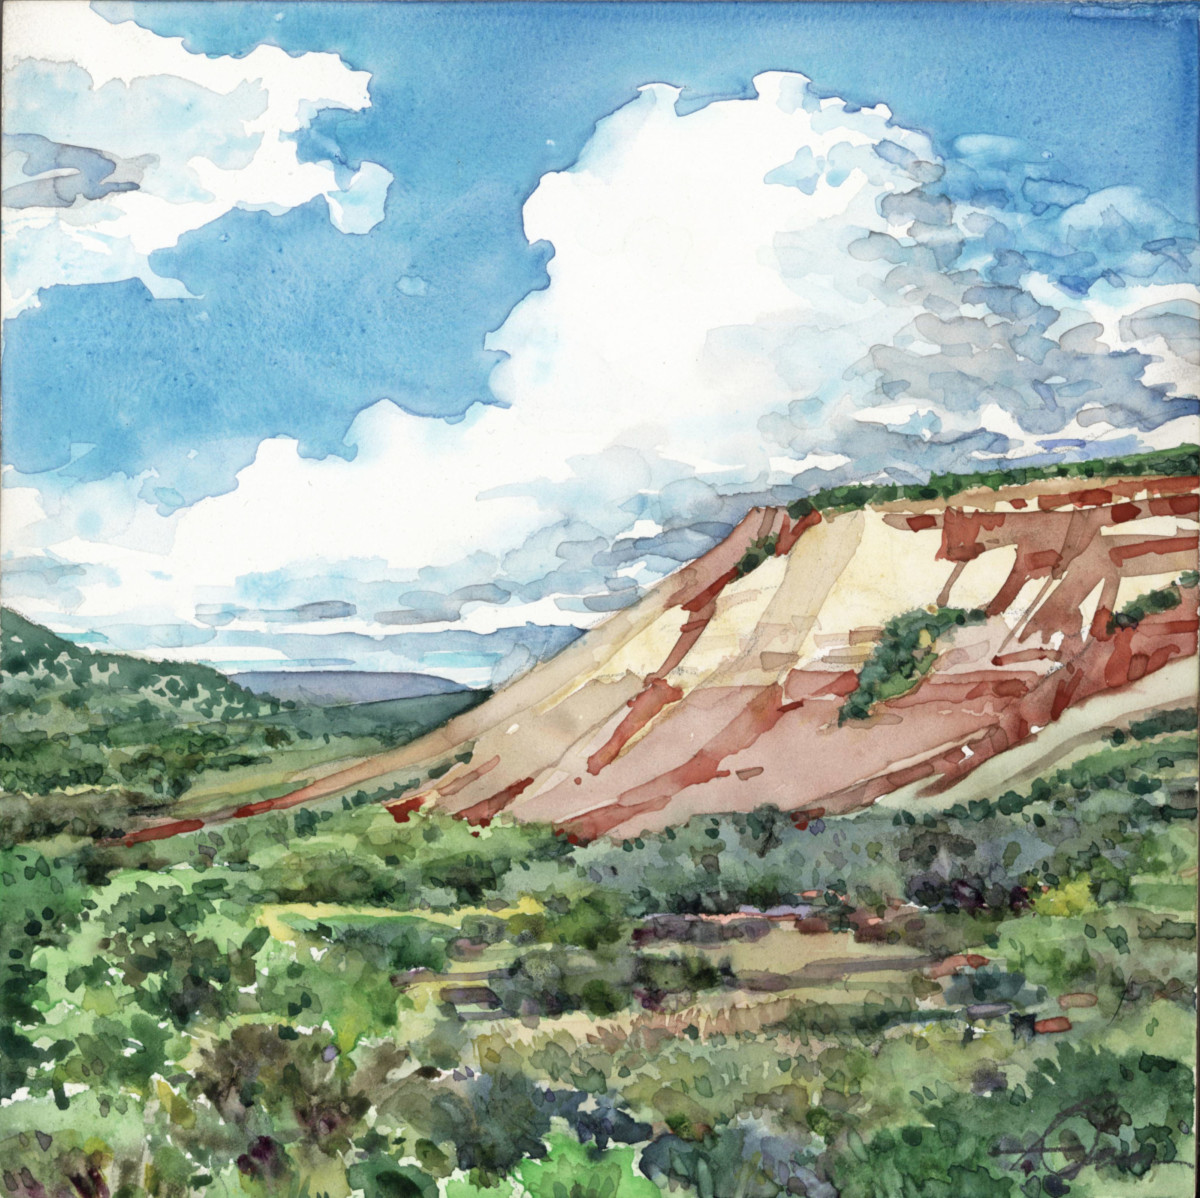 Northern New Mexico Landscape By Baron, New Mexico Landscape